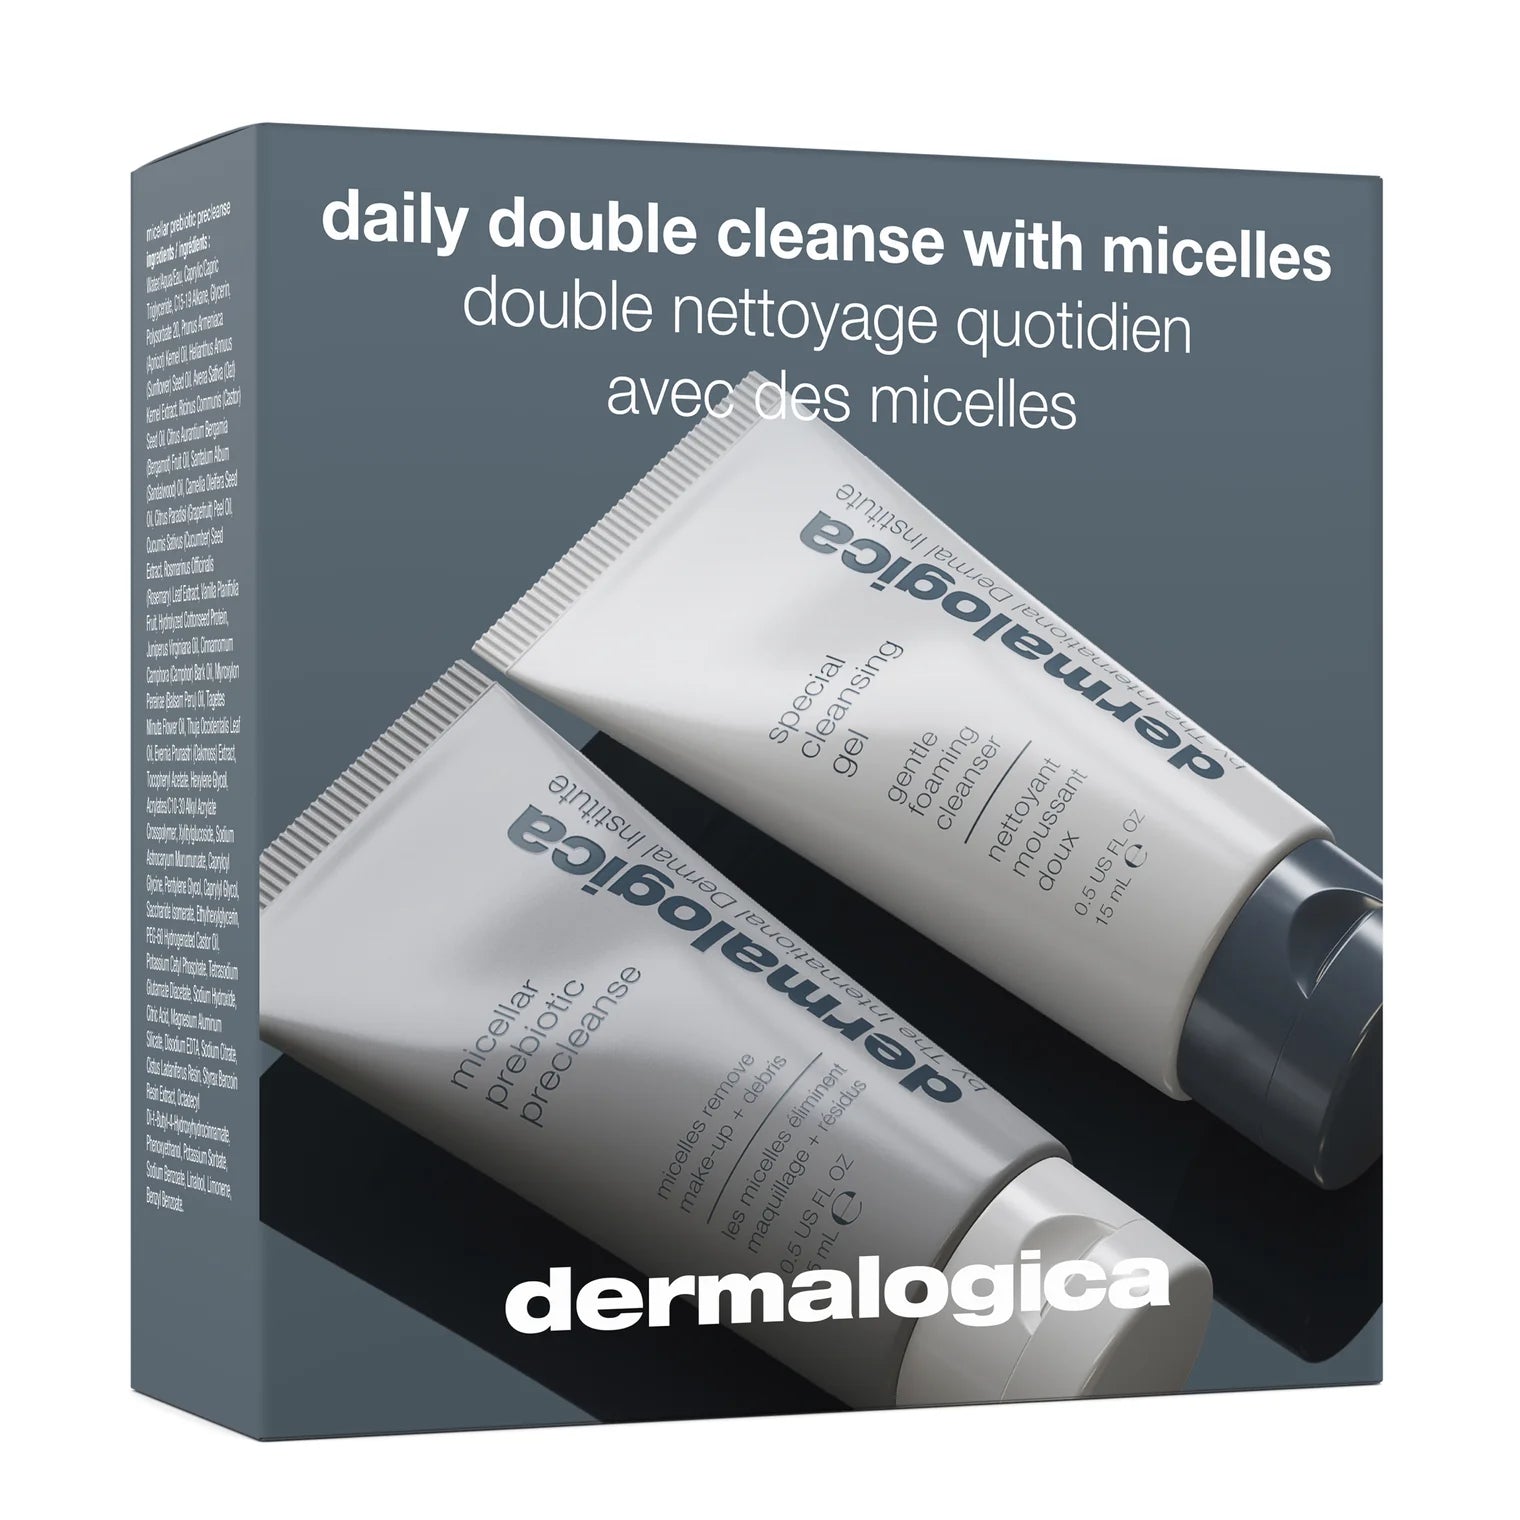 GWP Daily Double Cleanse with Micelles (Worth £11) - Heaven Therapy Skincare (12180245020832)